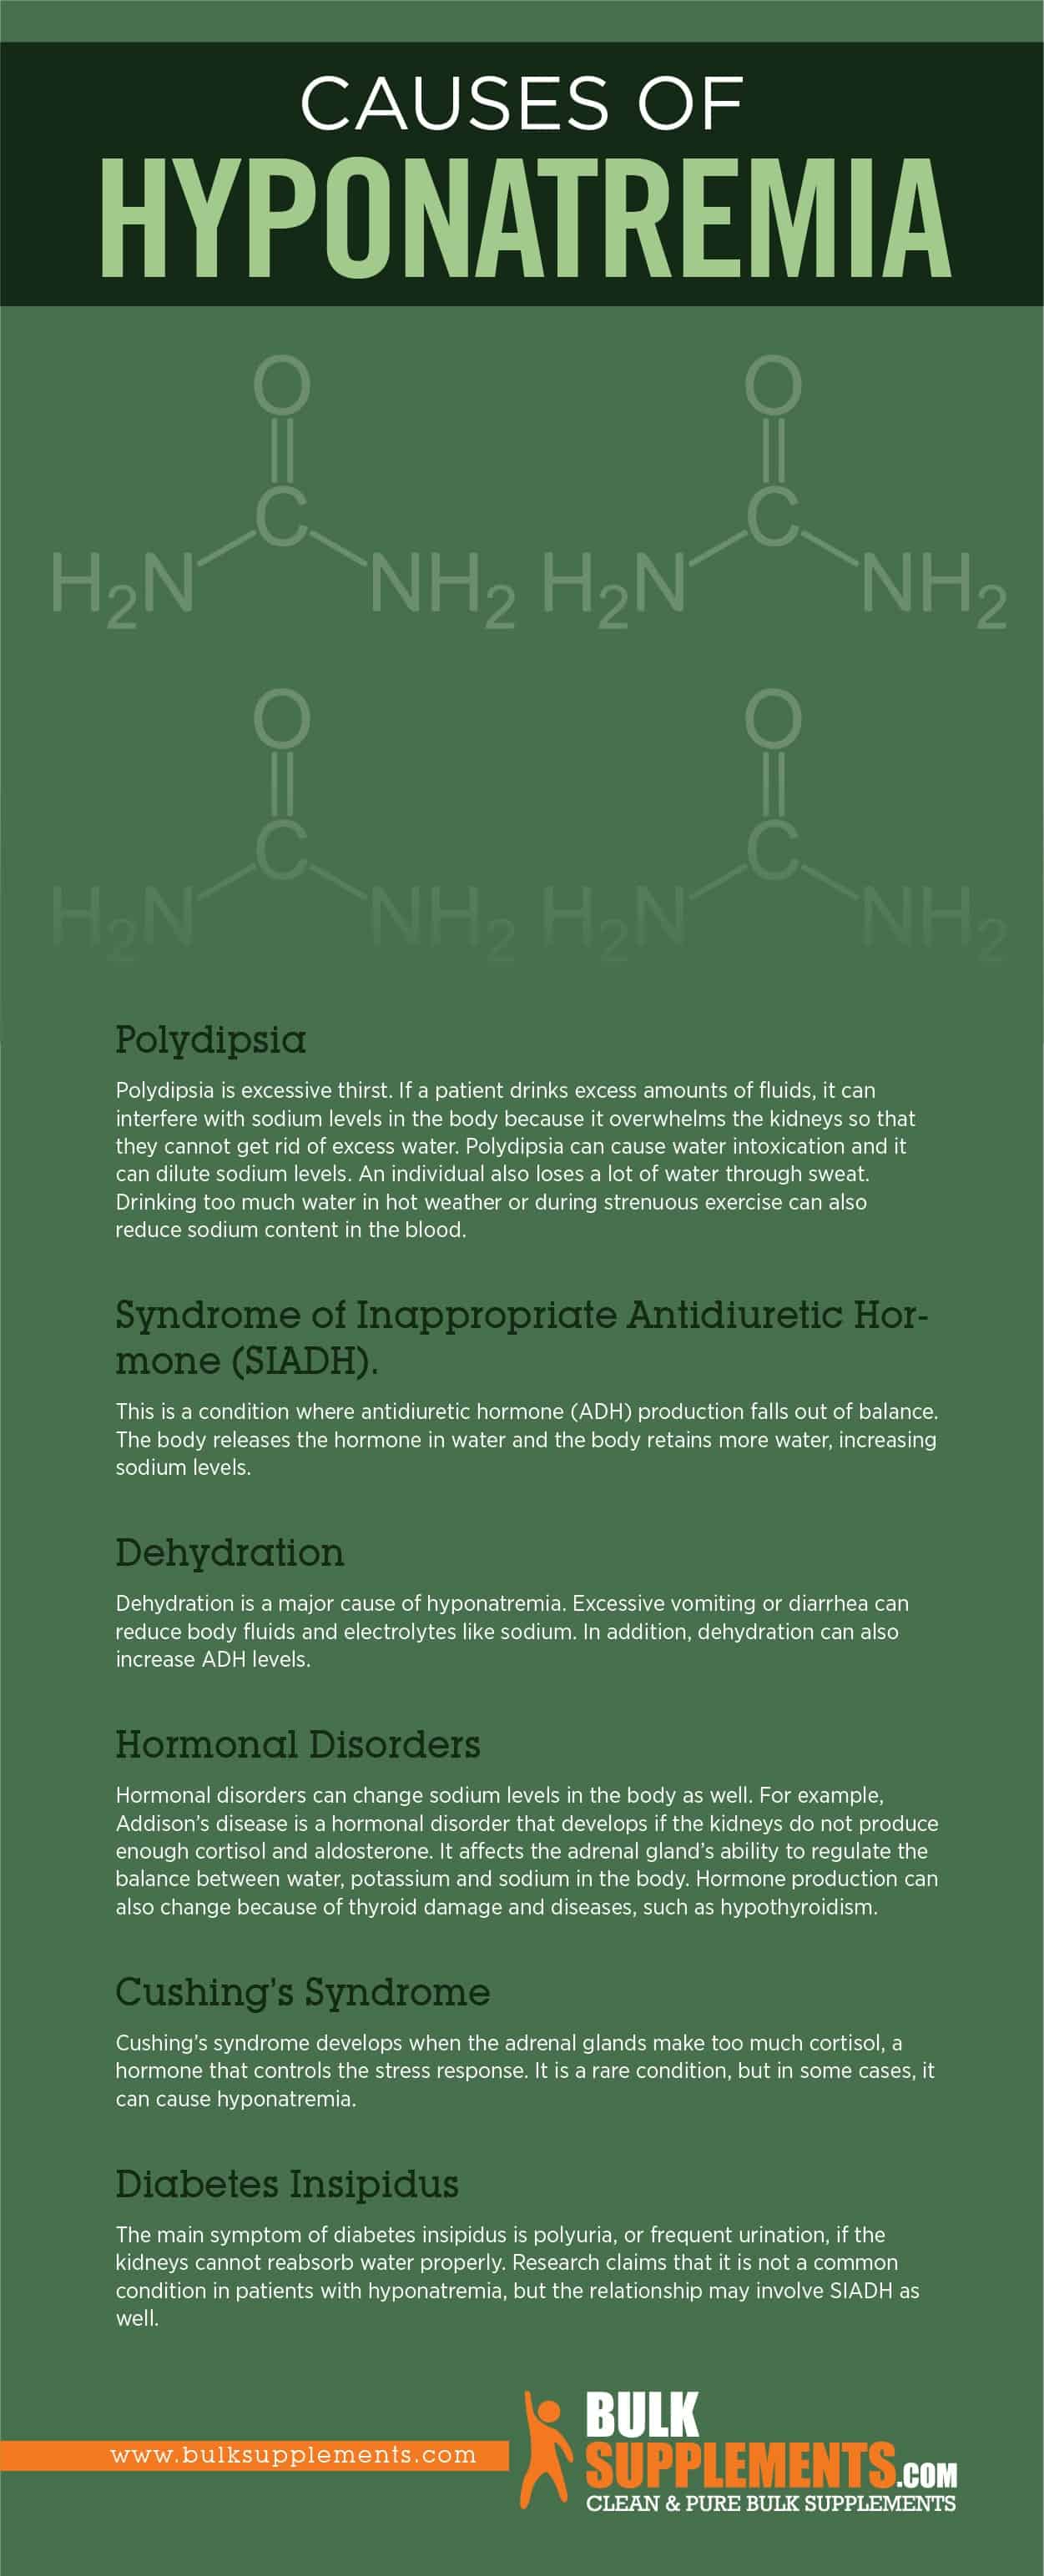 Causes of Hyponatremia